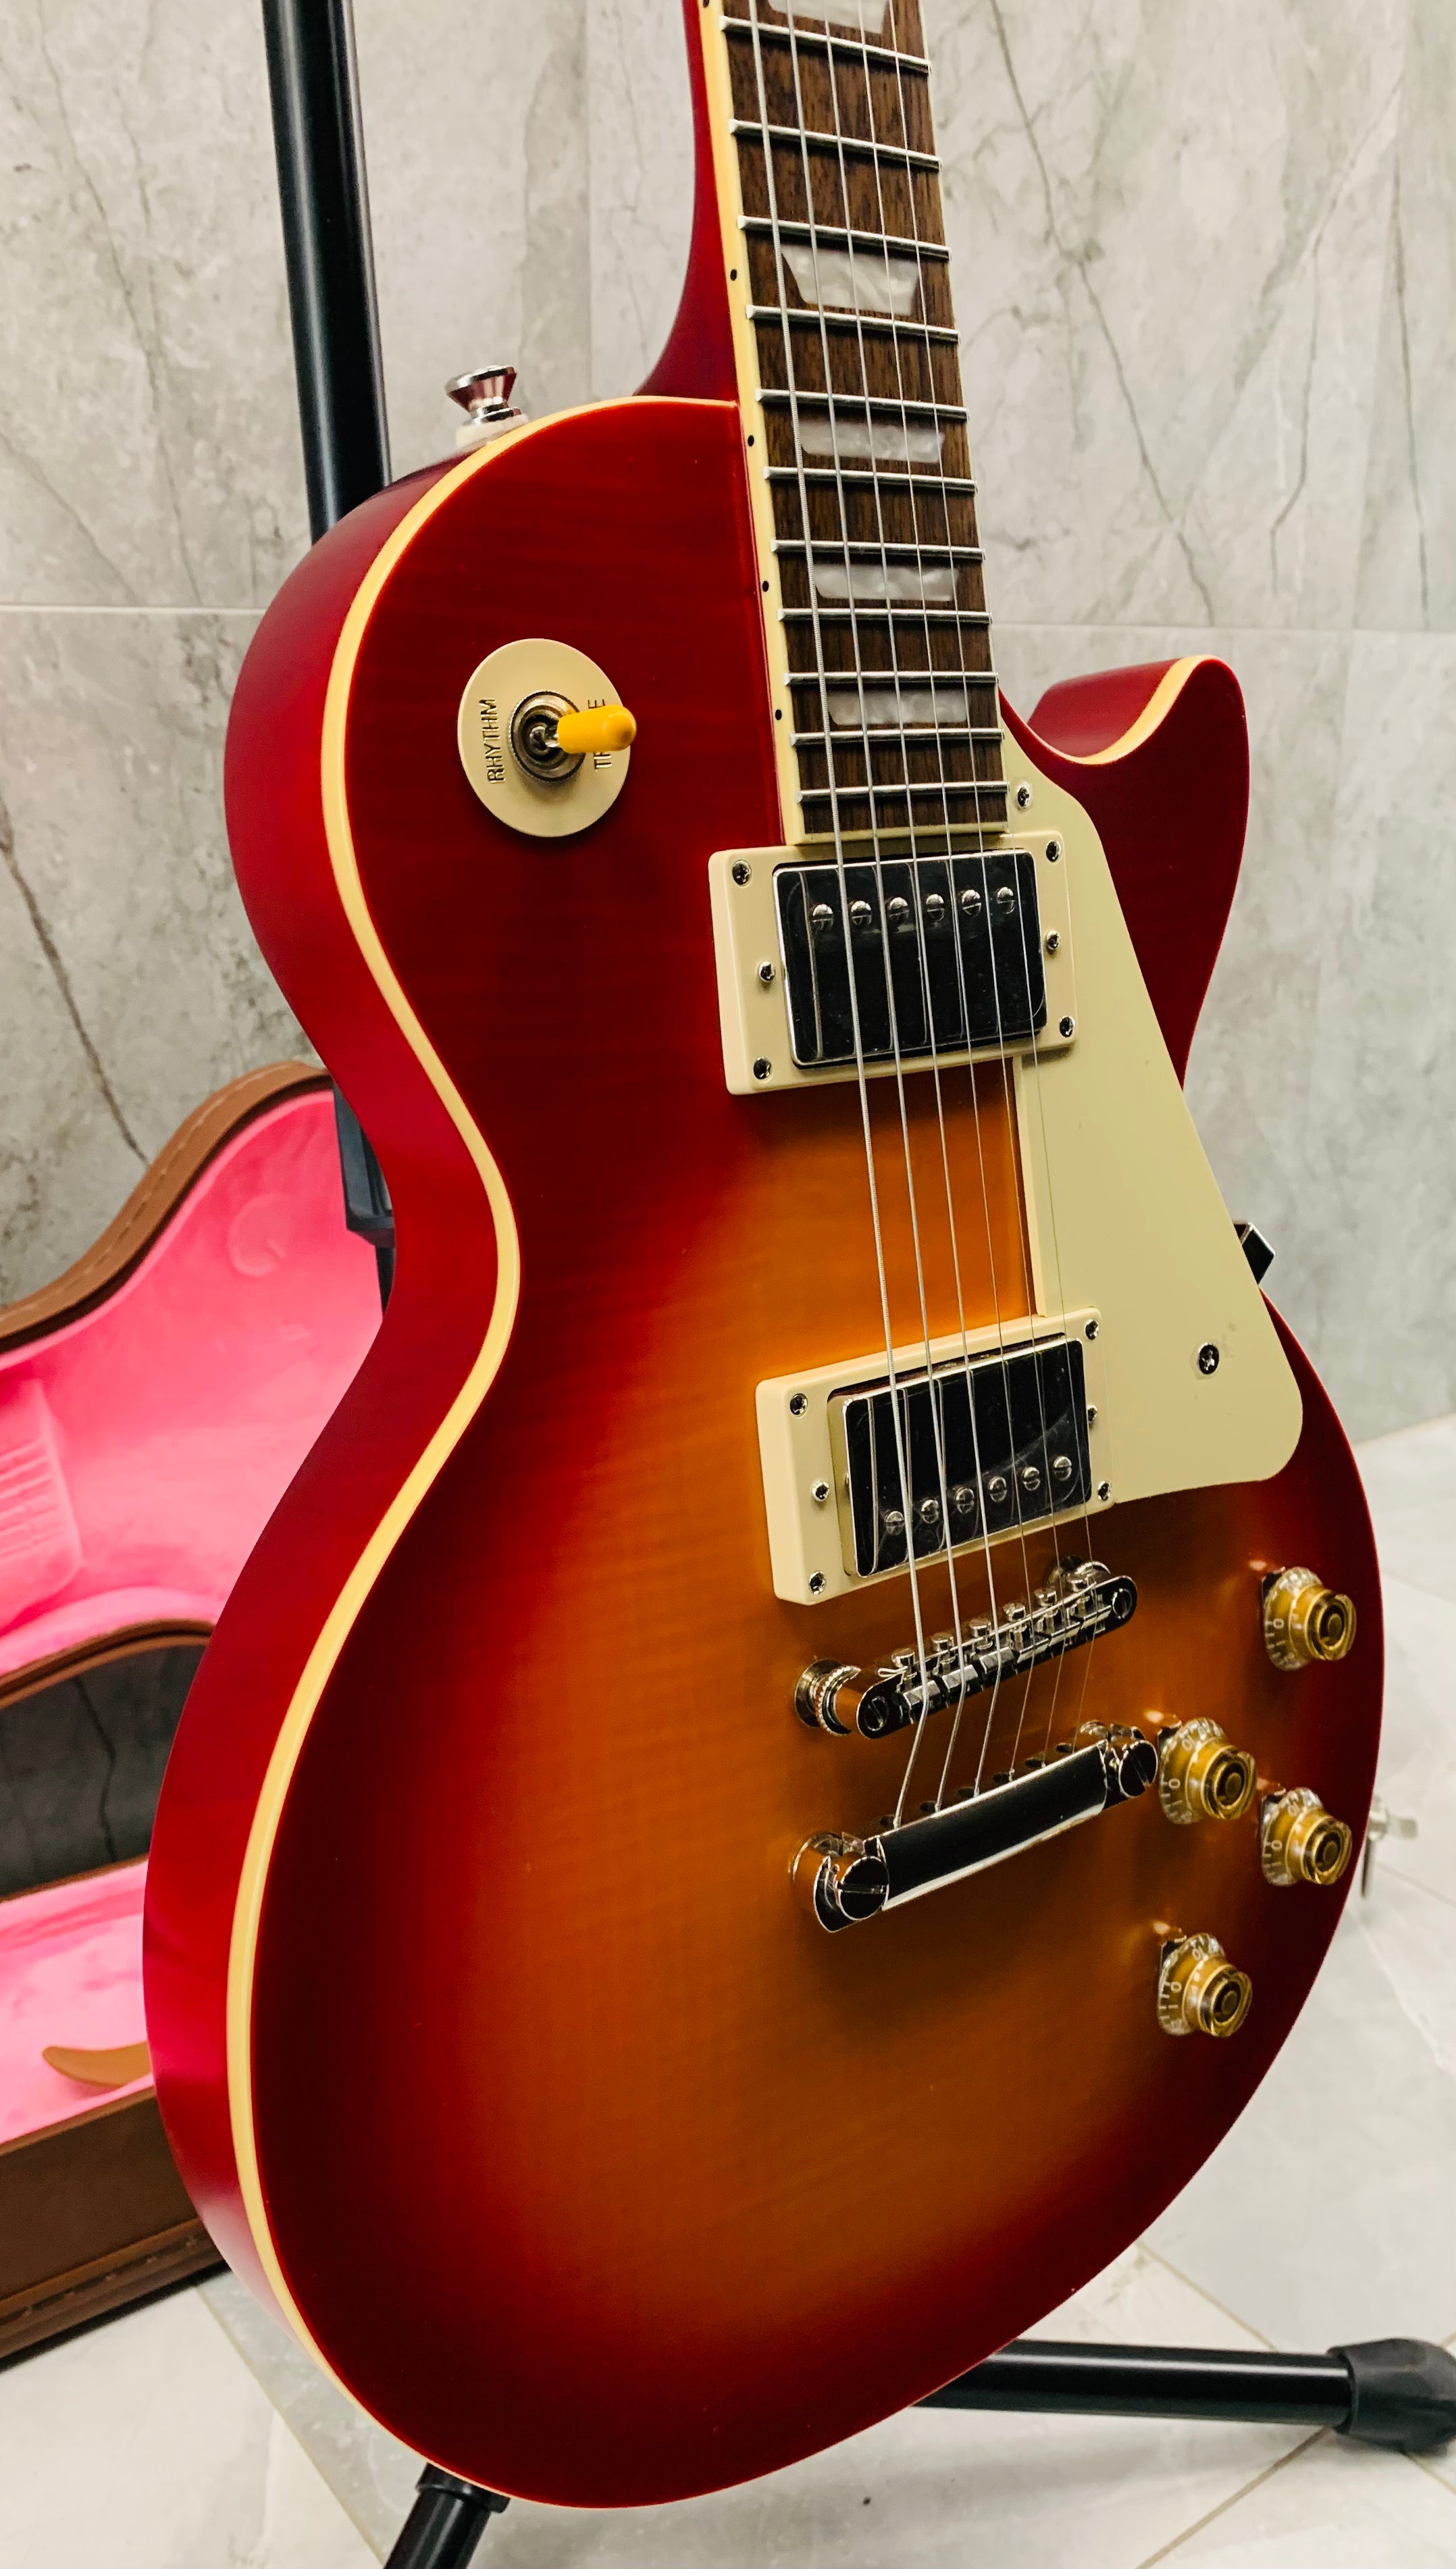 Epiphone Limited Edition 1959 Les Paul Standard 59 EL59ADCNH – Aged Dark  Cherry Burst SERIAL NUMBER 21081521644 - 8.8 LBS